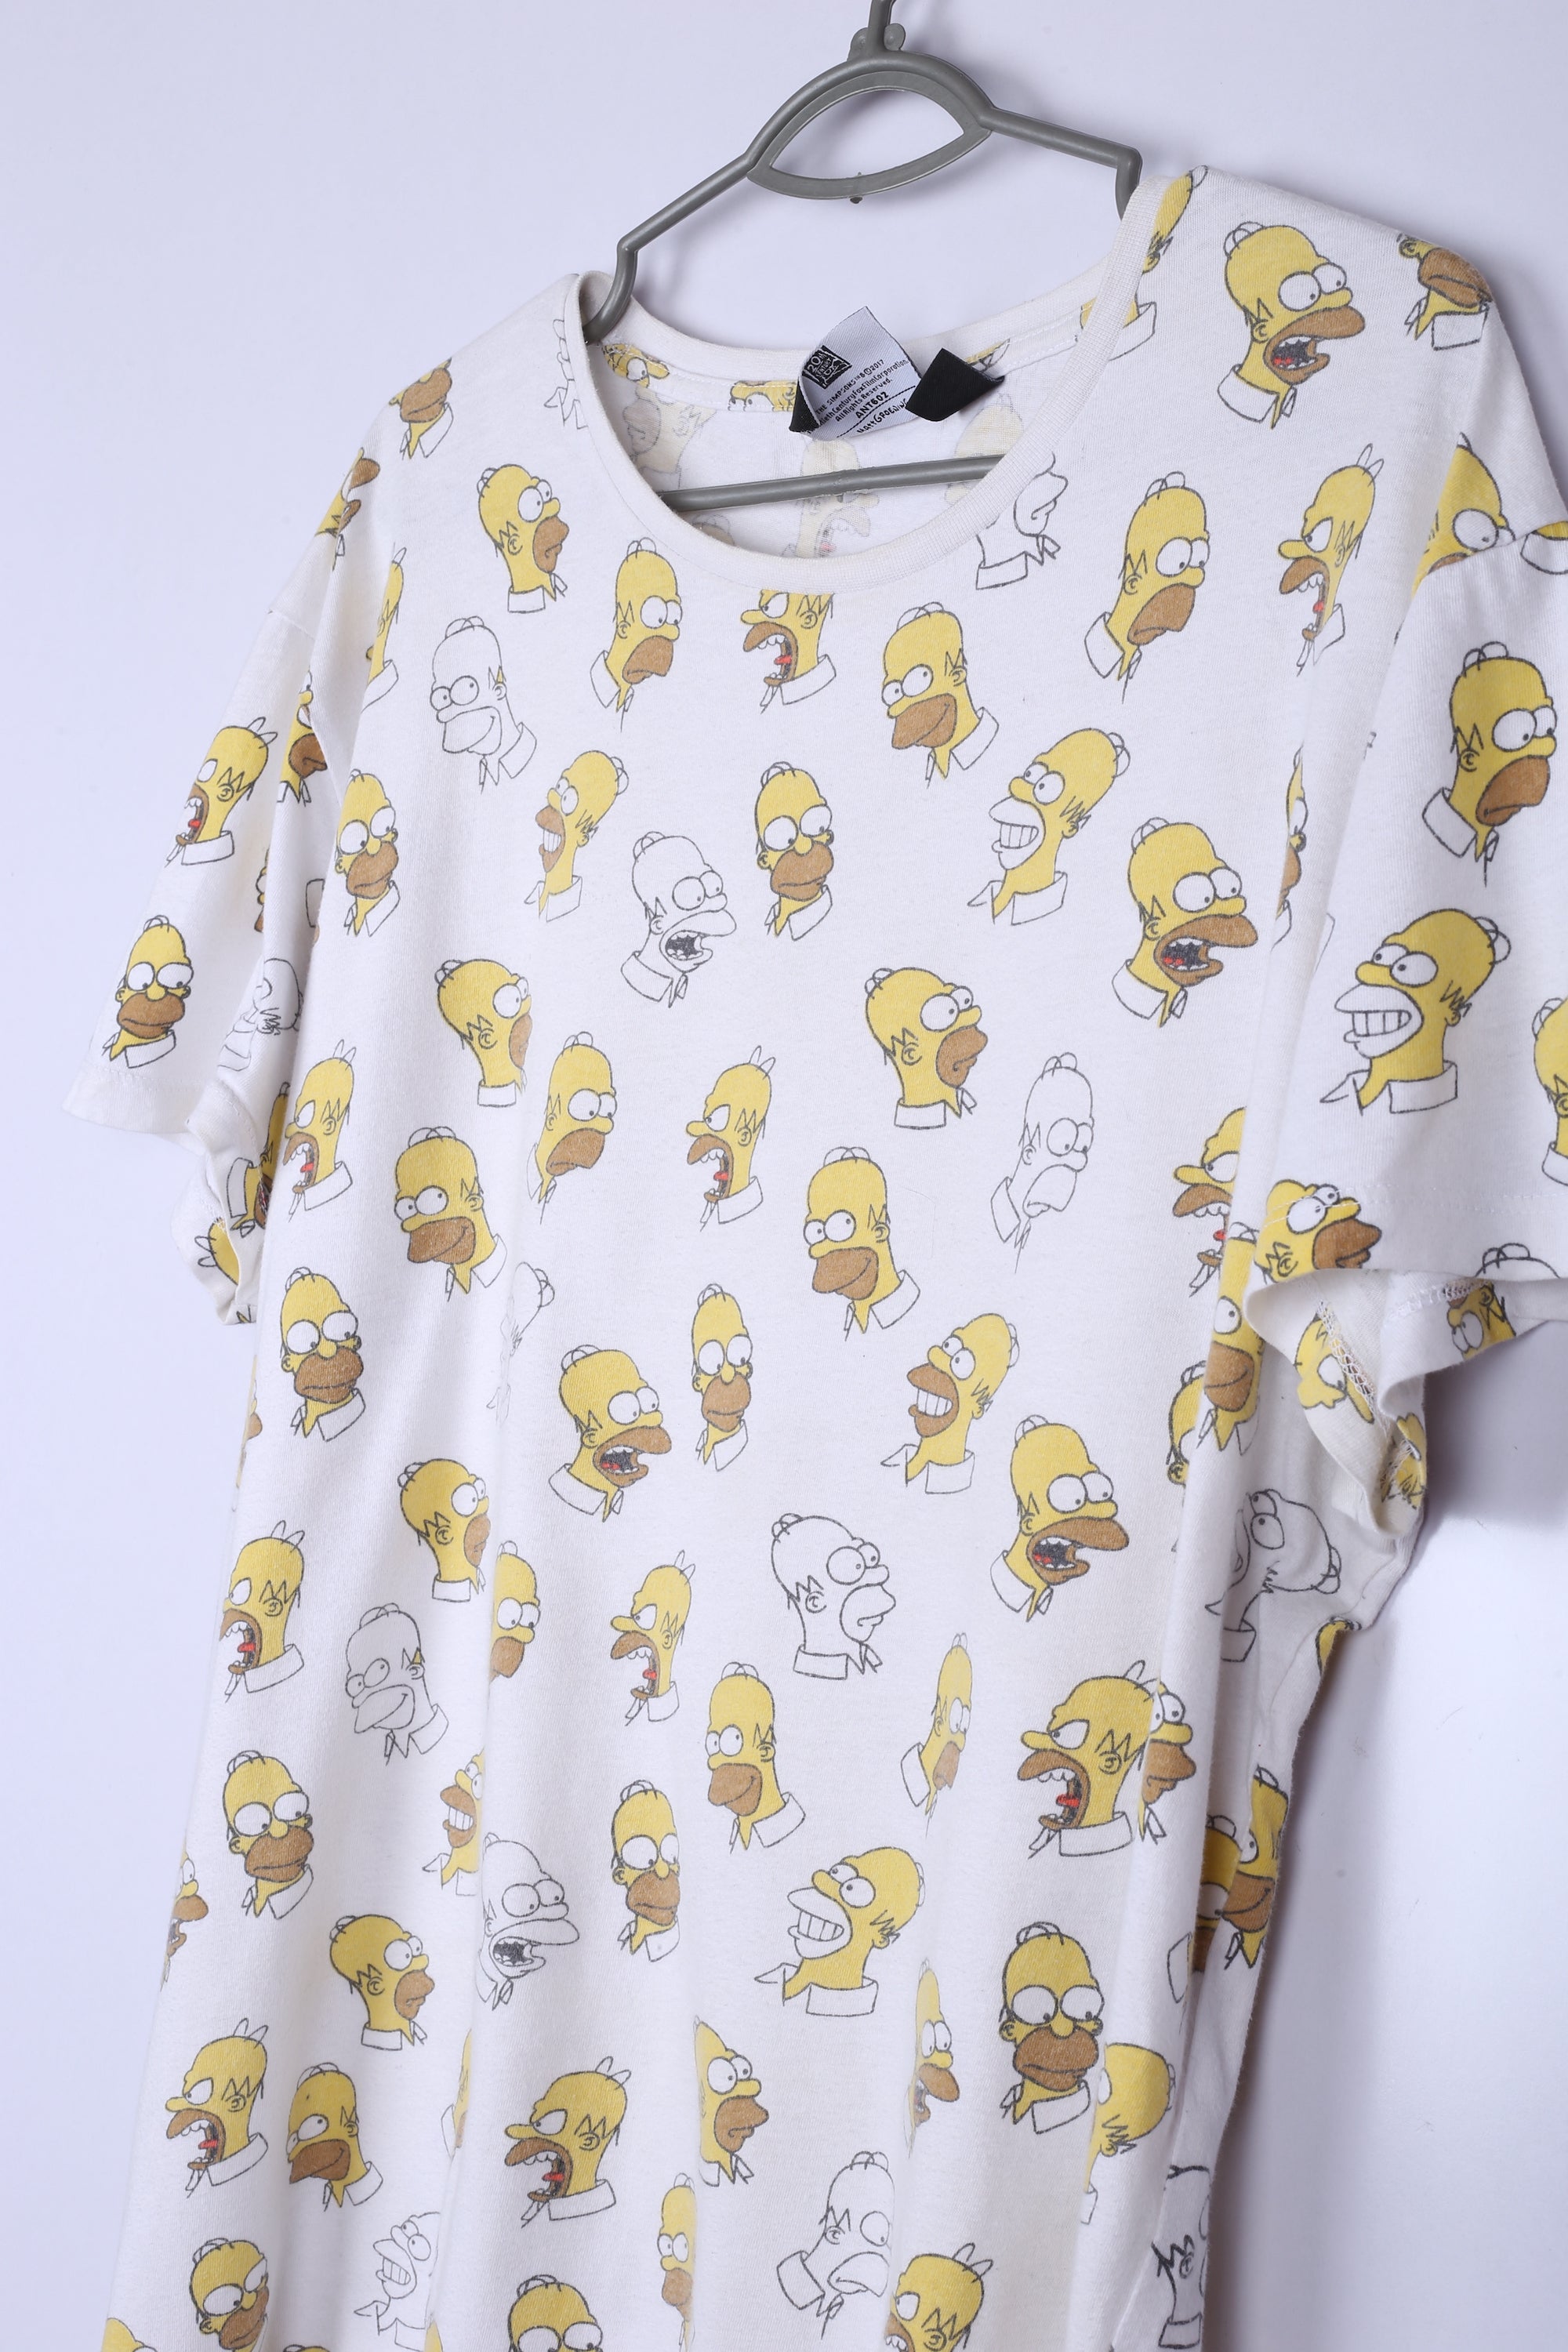 Vintage The Simpsons Graphic Tee White